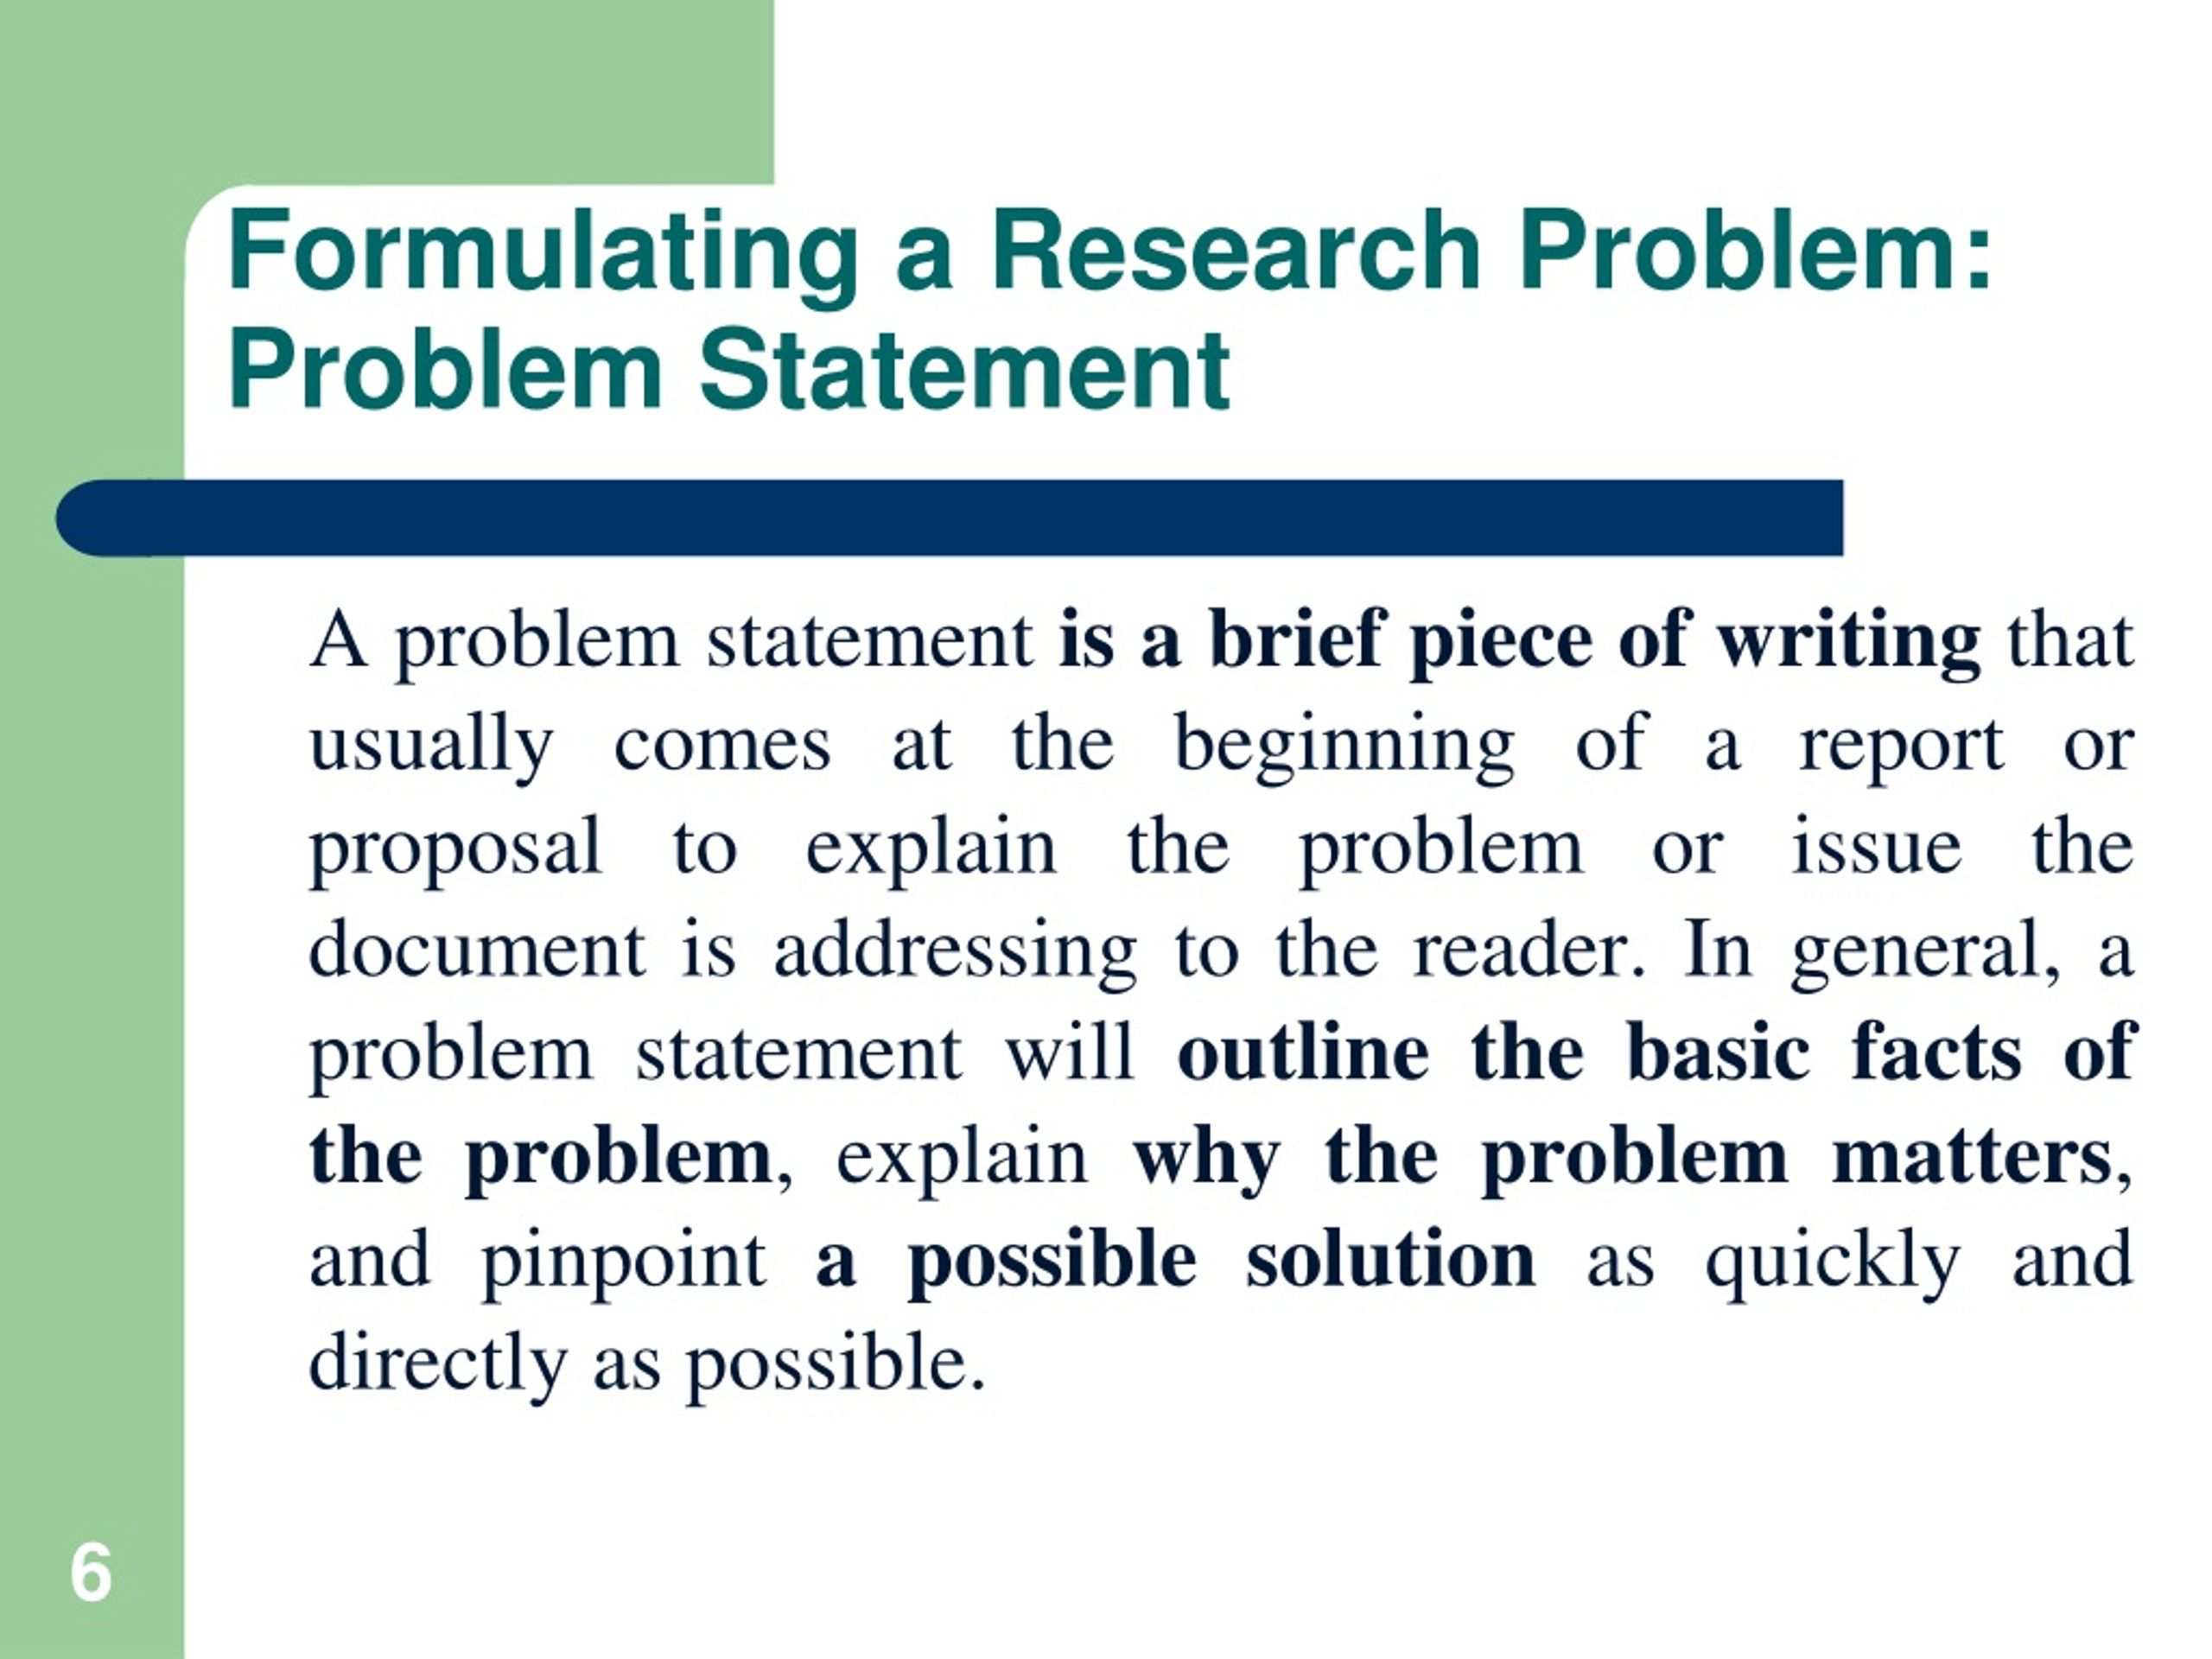 formulation of a research problem